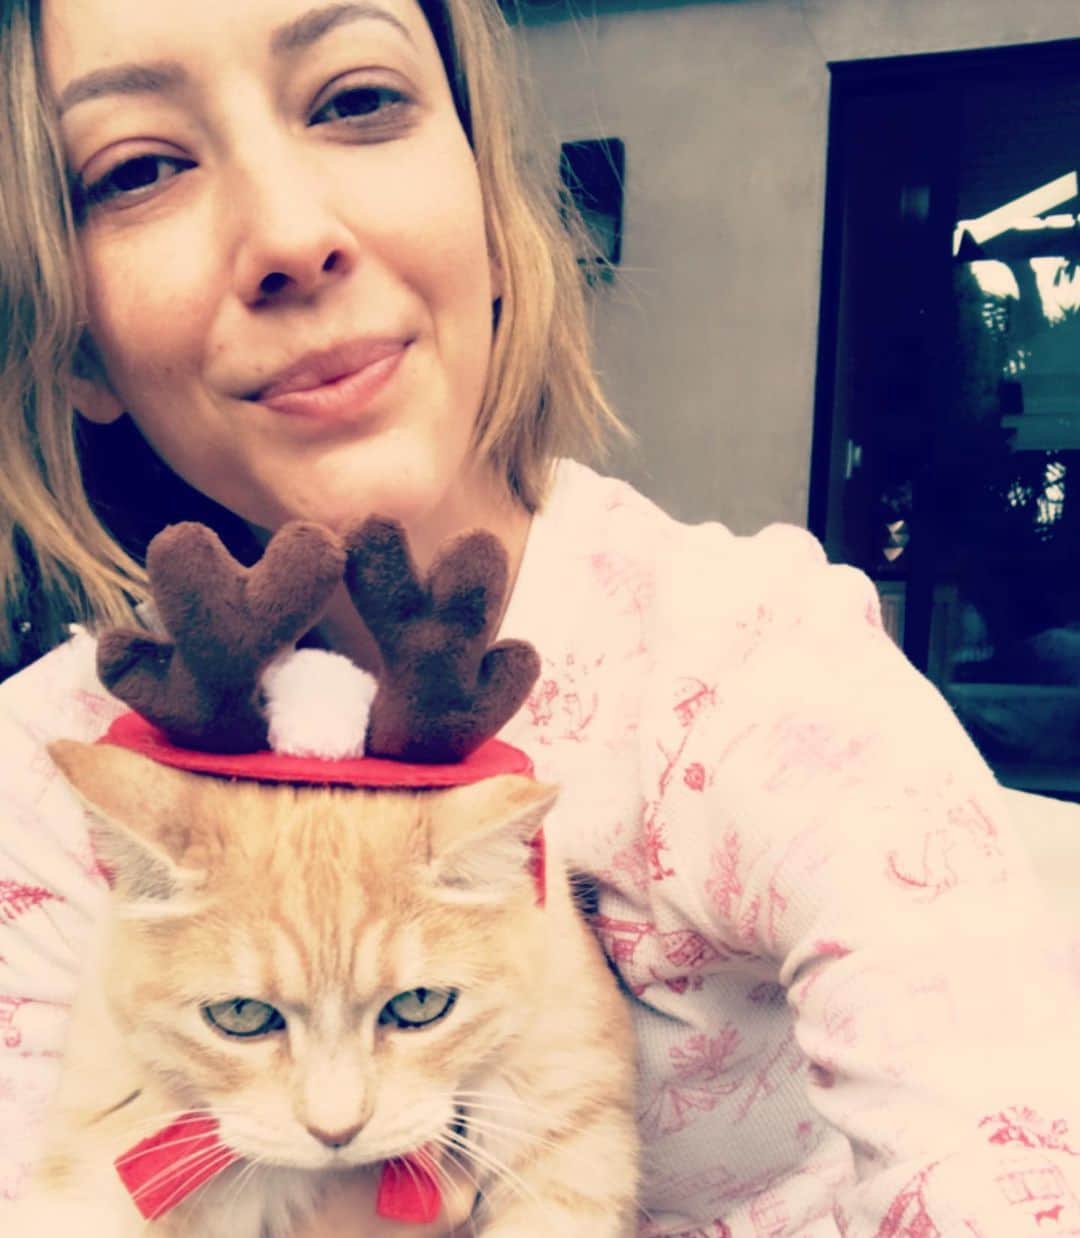 タリン・サザンのインスタグラム：「Christmas morning 2019 I woke up puffy and bleary-eyed, having just received some unexpected & upsetting news the night before.   To distract myself from myself, I tried putting Tiggie in a festive costume (1st photo), but it did little to lift my spirits. I tried to meditate, but my mind only had space for tears. I still had another month of daily radiation at the hospital, so there was no escaping LA either. And my tiny 1 ft. pine tree, which I had purchased in a fit of giggles for my new home, suddenly looked like the saddest sight ever seen.   I looked in the mirror at the large pale bald spots from chemo. Who would want this, I thought. For the first time, I felt unable to soothe a growing sense of loneliness and despair. I wondered…how did I get here? And more importantly, how do I claw my way out?  One year later - and I am in Bali (2nd photo.) Here there are no reminders of the holidays. No cat costumes or tiny pine trees to lure me back into a dance with darkness. Just the thick heat of jungle air, an even thicker head of hair, and sweet chunks of papaya with friends old and new.   Healing the physical and emotional wounds of this past year has been a slow and deceptive process. Just when I feel I’m finally out of the weeds, I stumble upon a new pang. But I’m pretty sure that’s how this whole ‘being human’ and healing thing works.   When things are profoundly hard, that’s just it, there’s no shortcut through or around it….just connection, warmth, and touch to soften the edges. The process is a bit like peeling a stupid magic onion that keeps growing as you peel. The onion never quite disappears (f’n onion!!), but the trick is to just keep peeling. Eventually, the stupid onion gets smaller, and the sting of associated tears lessens as well.  For those navigating the harder edges of life right now, give yourself grace in doing whatever it is you need to keep moving. Whether that’s leaning into the grief, finding distraction, loving it into submission, or a million and one other strategies in between, there is no wrong path. You’re chipping away at a very stubborn stupid onion. Eventually, the sting will simmer and subside.  T」